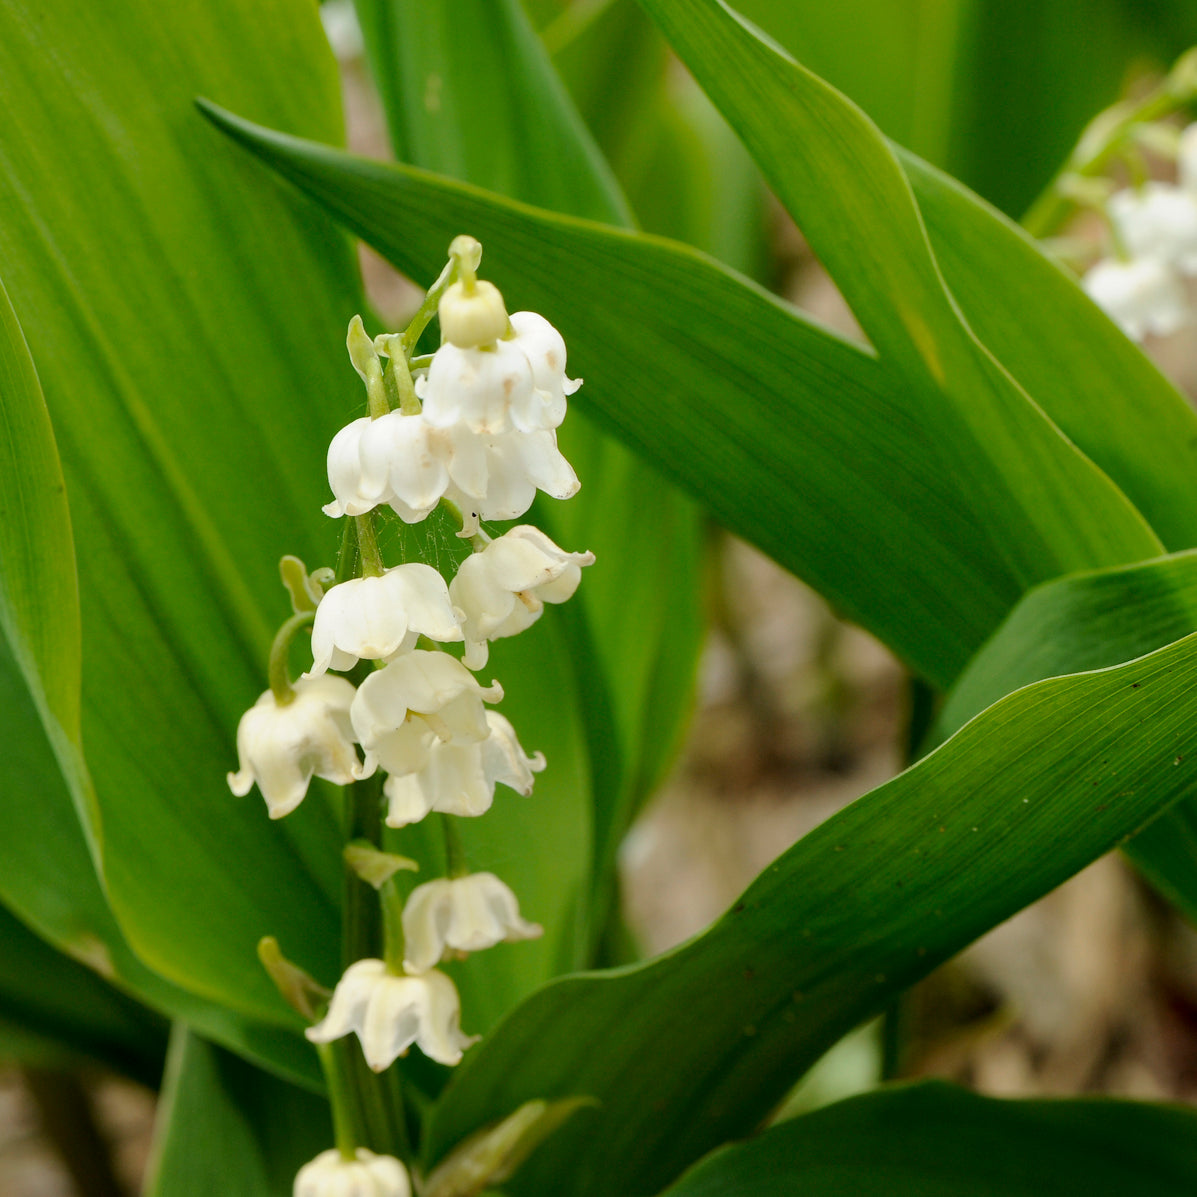 Lily-of-the-Valley (Convallaria majalis)